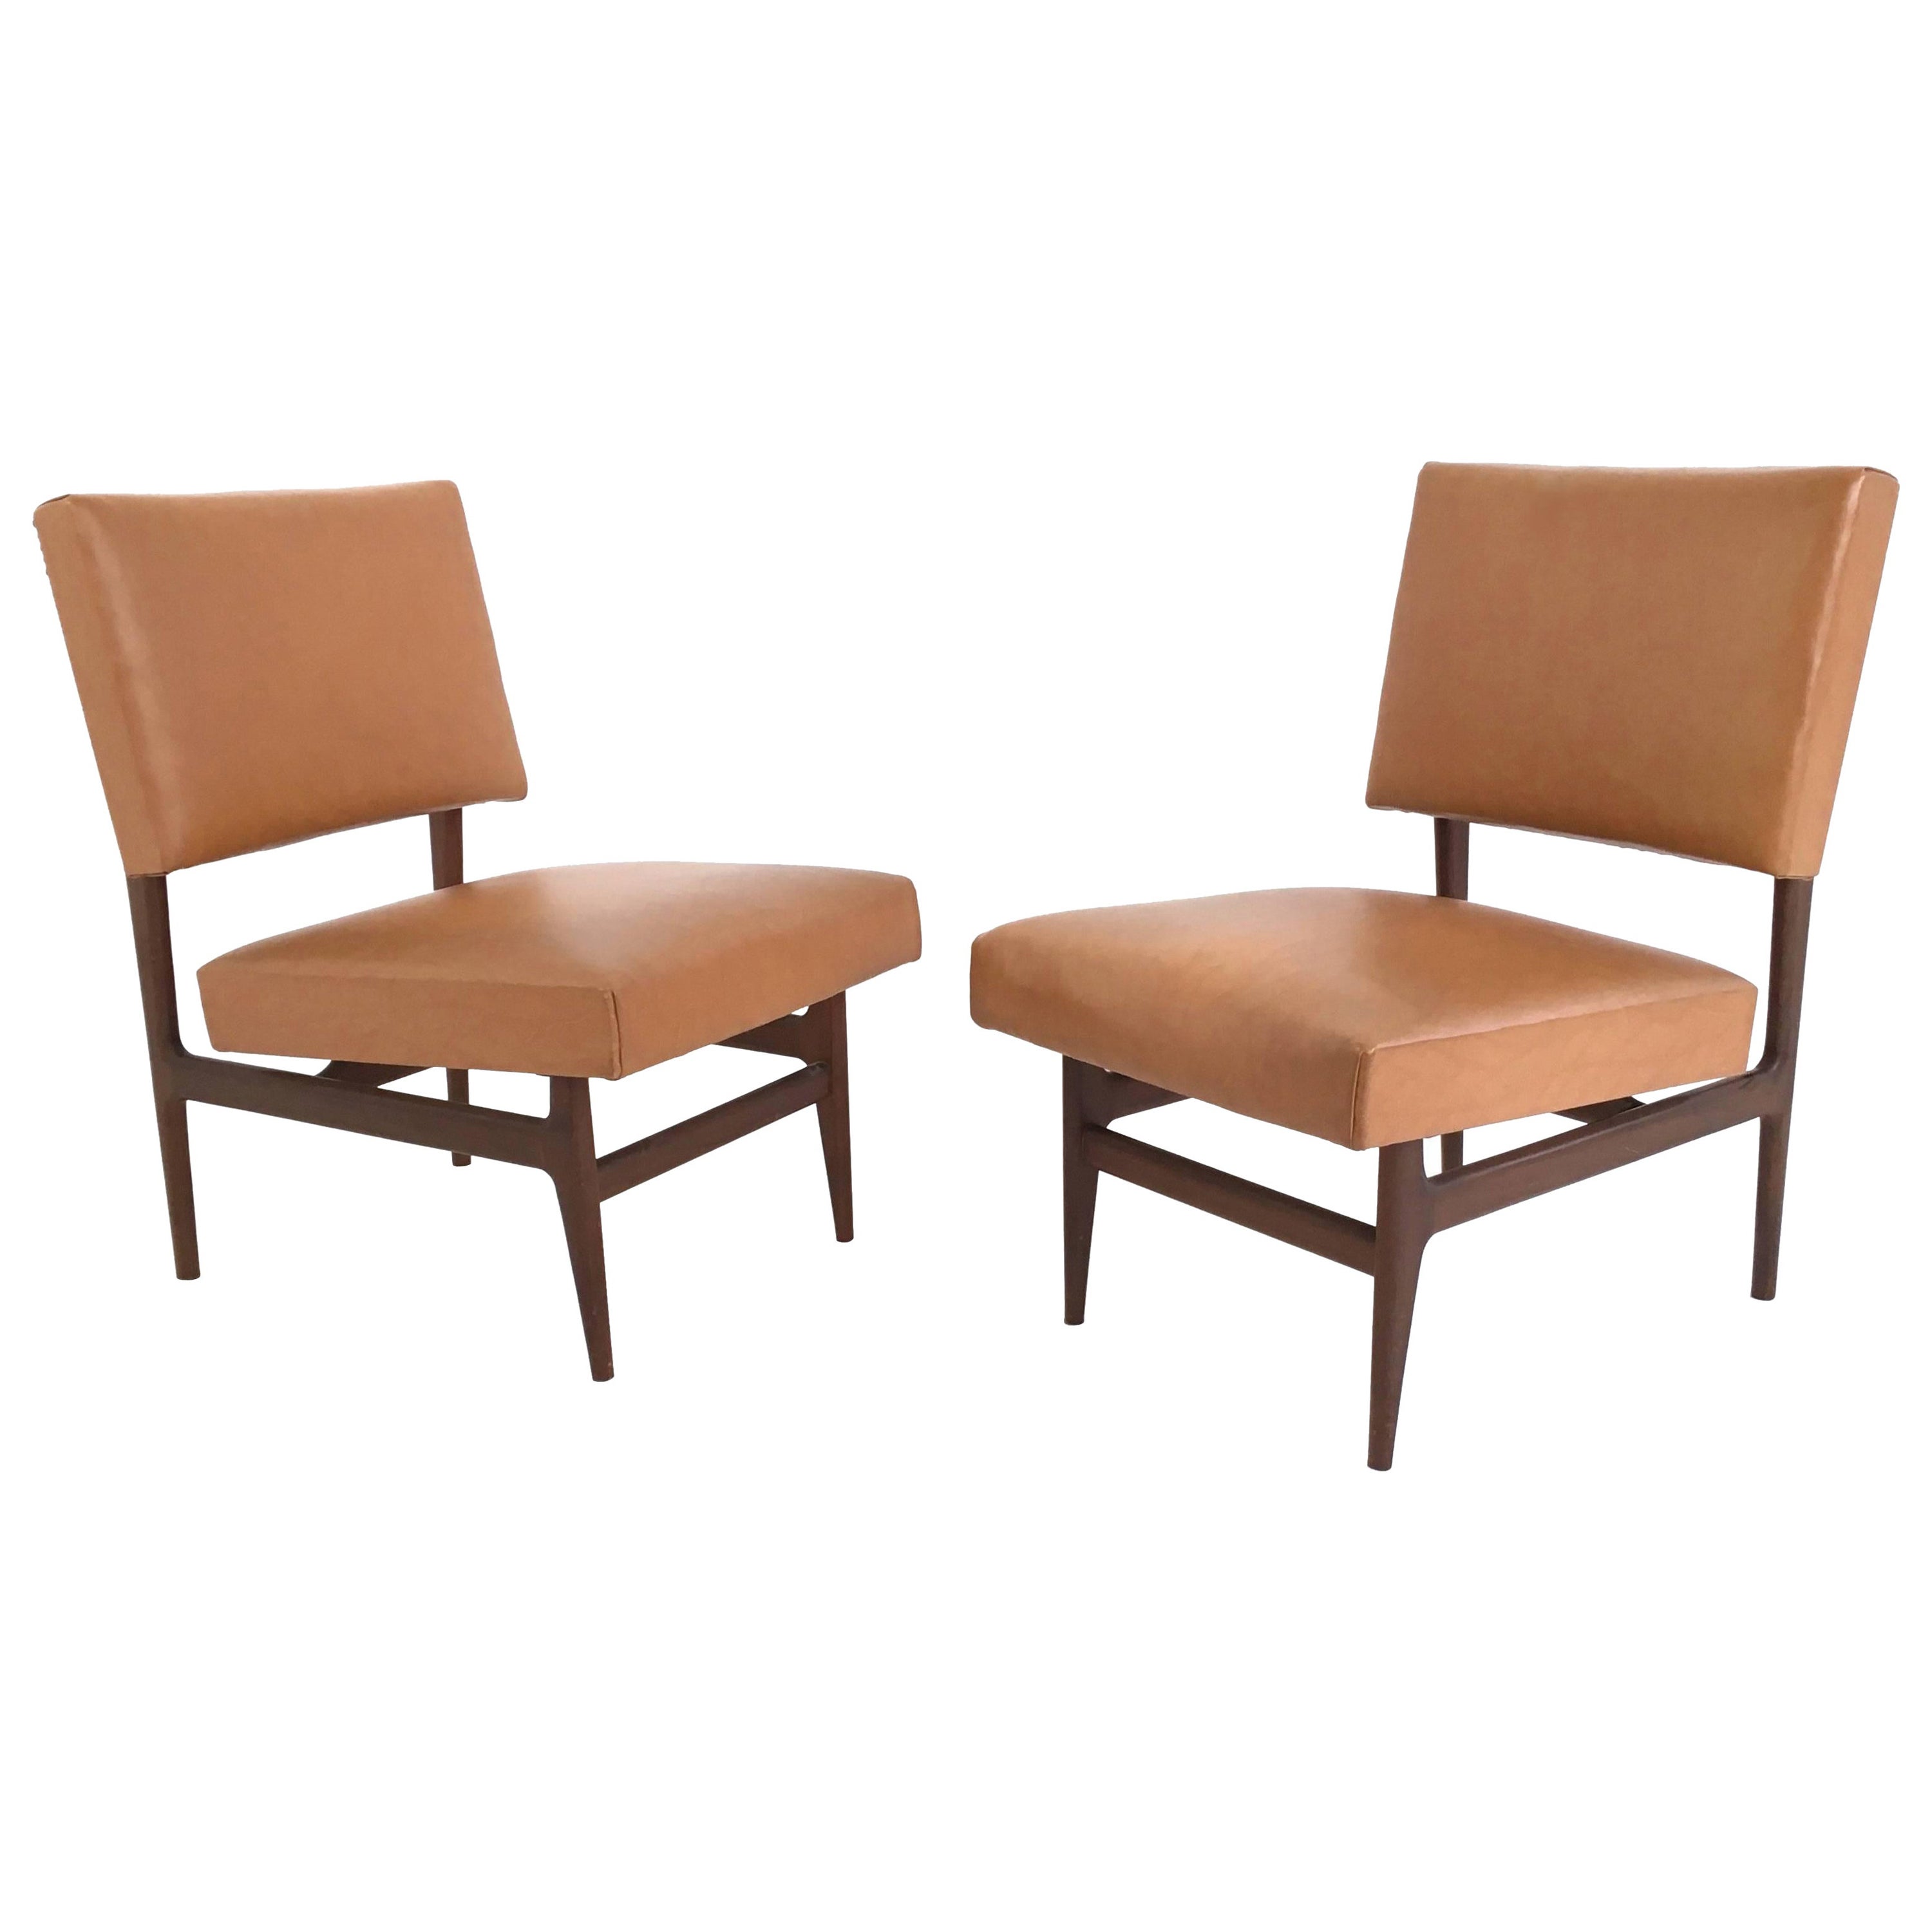 Pair of Vintage Camel Skai Lounge Chairs with Ebonized Wood Frame by Dassi For Sale